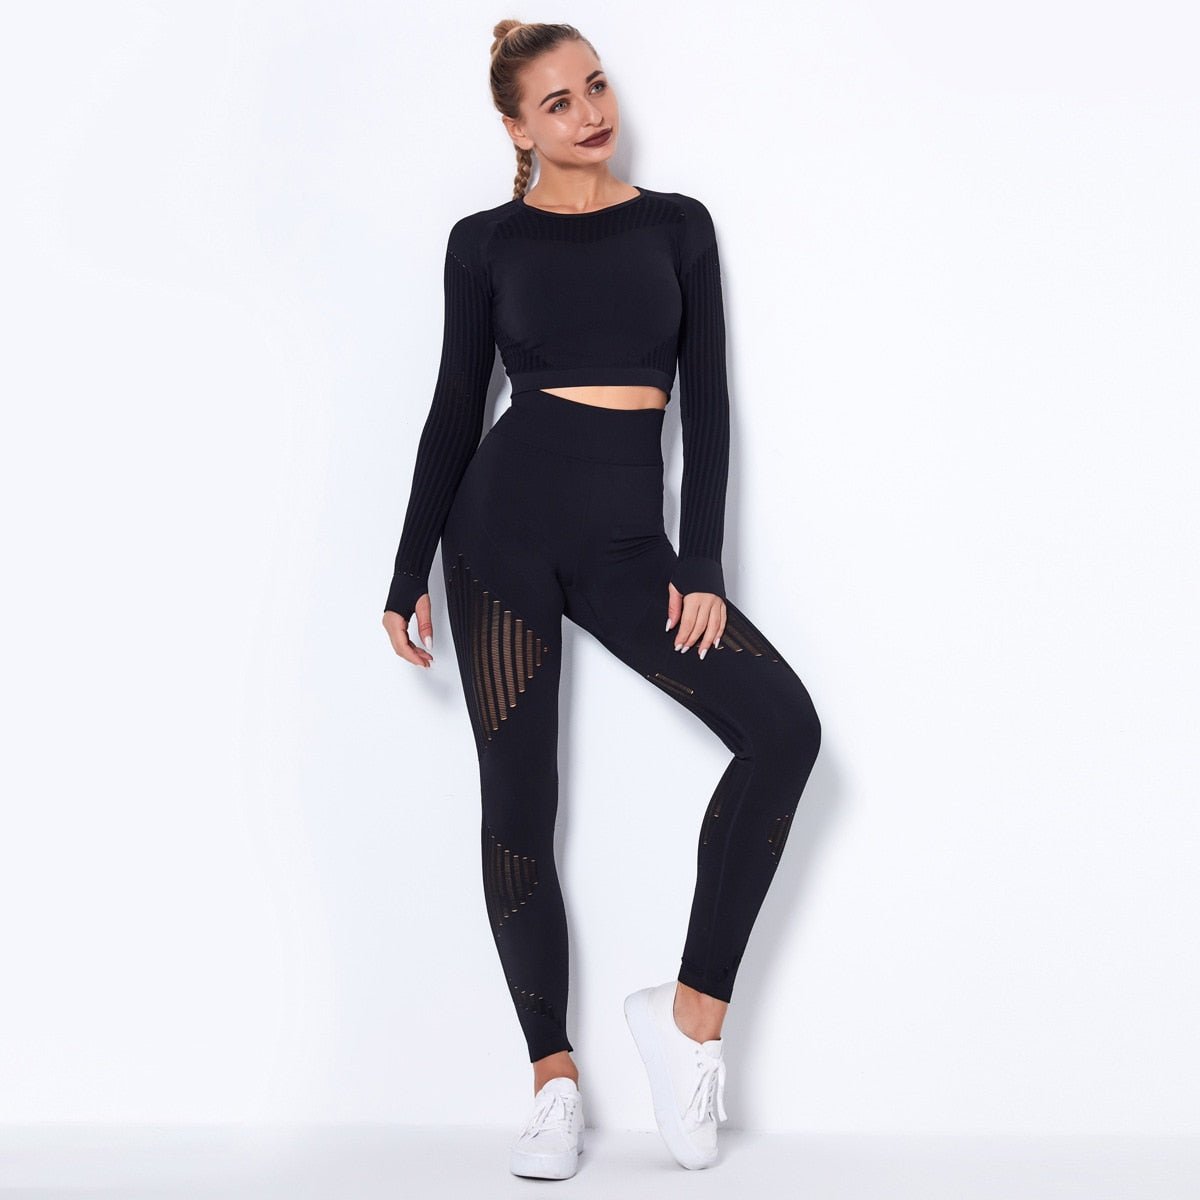 Hollow Out Seamless Yoga Set Sport Outfits Women Black Two 2 Piece